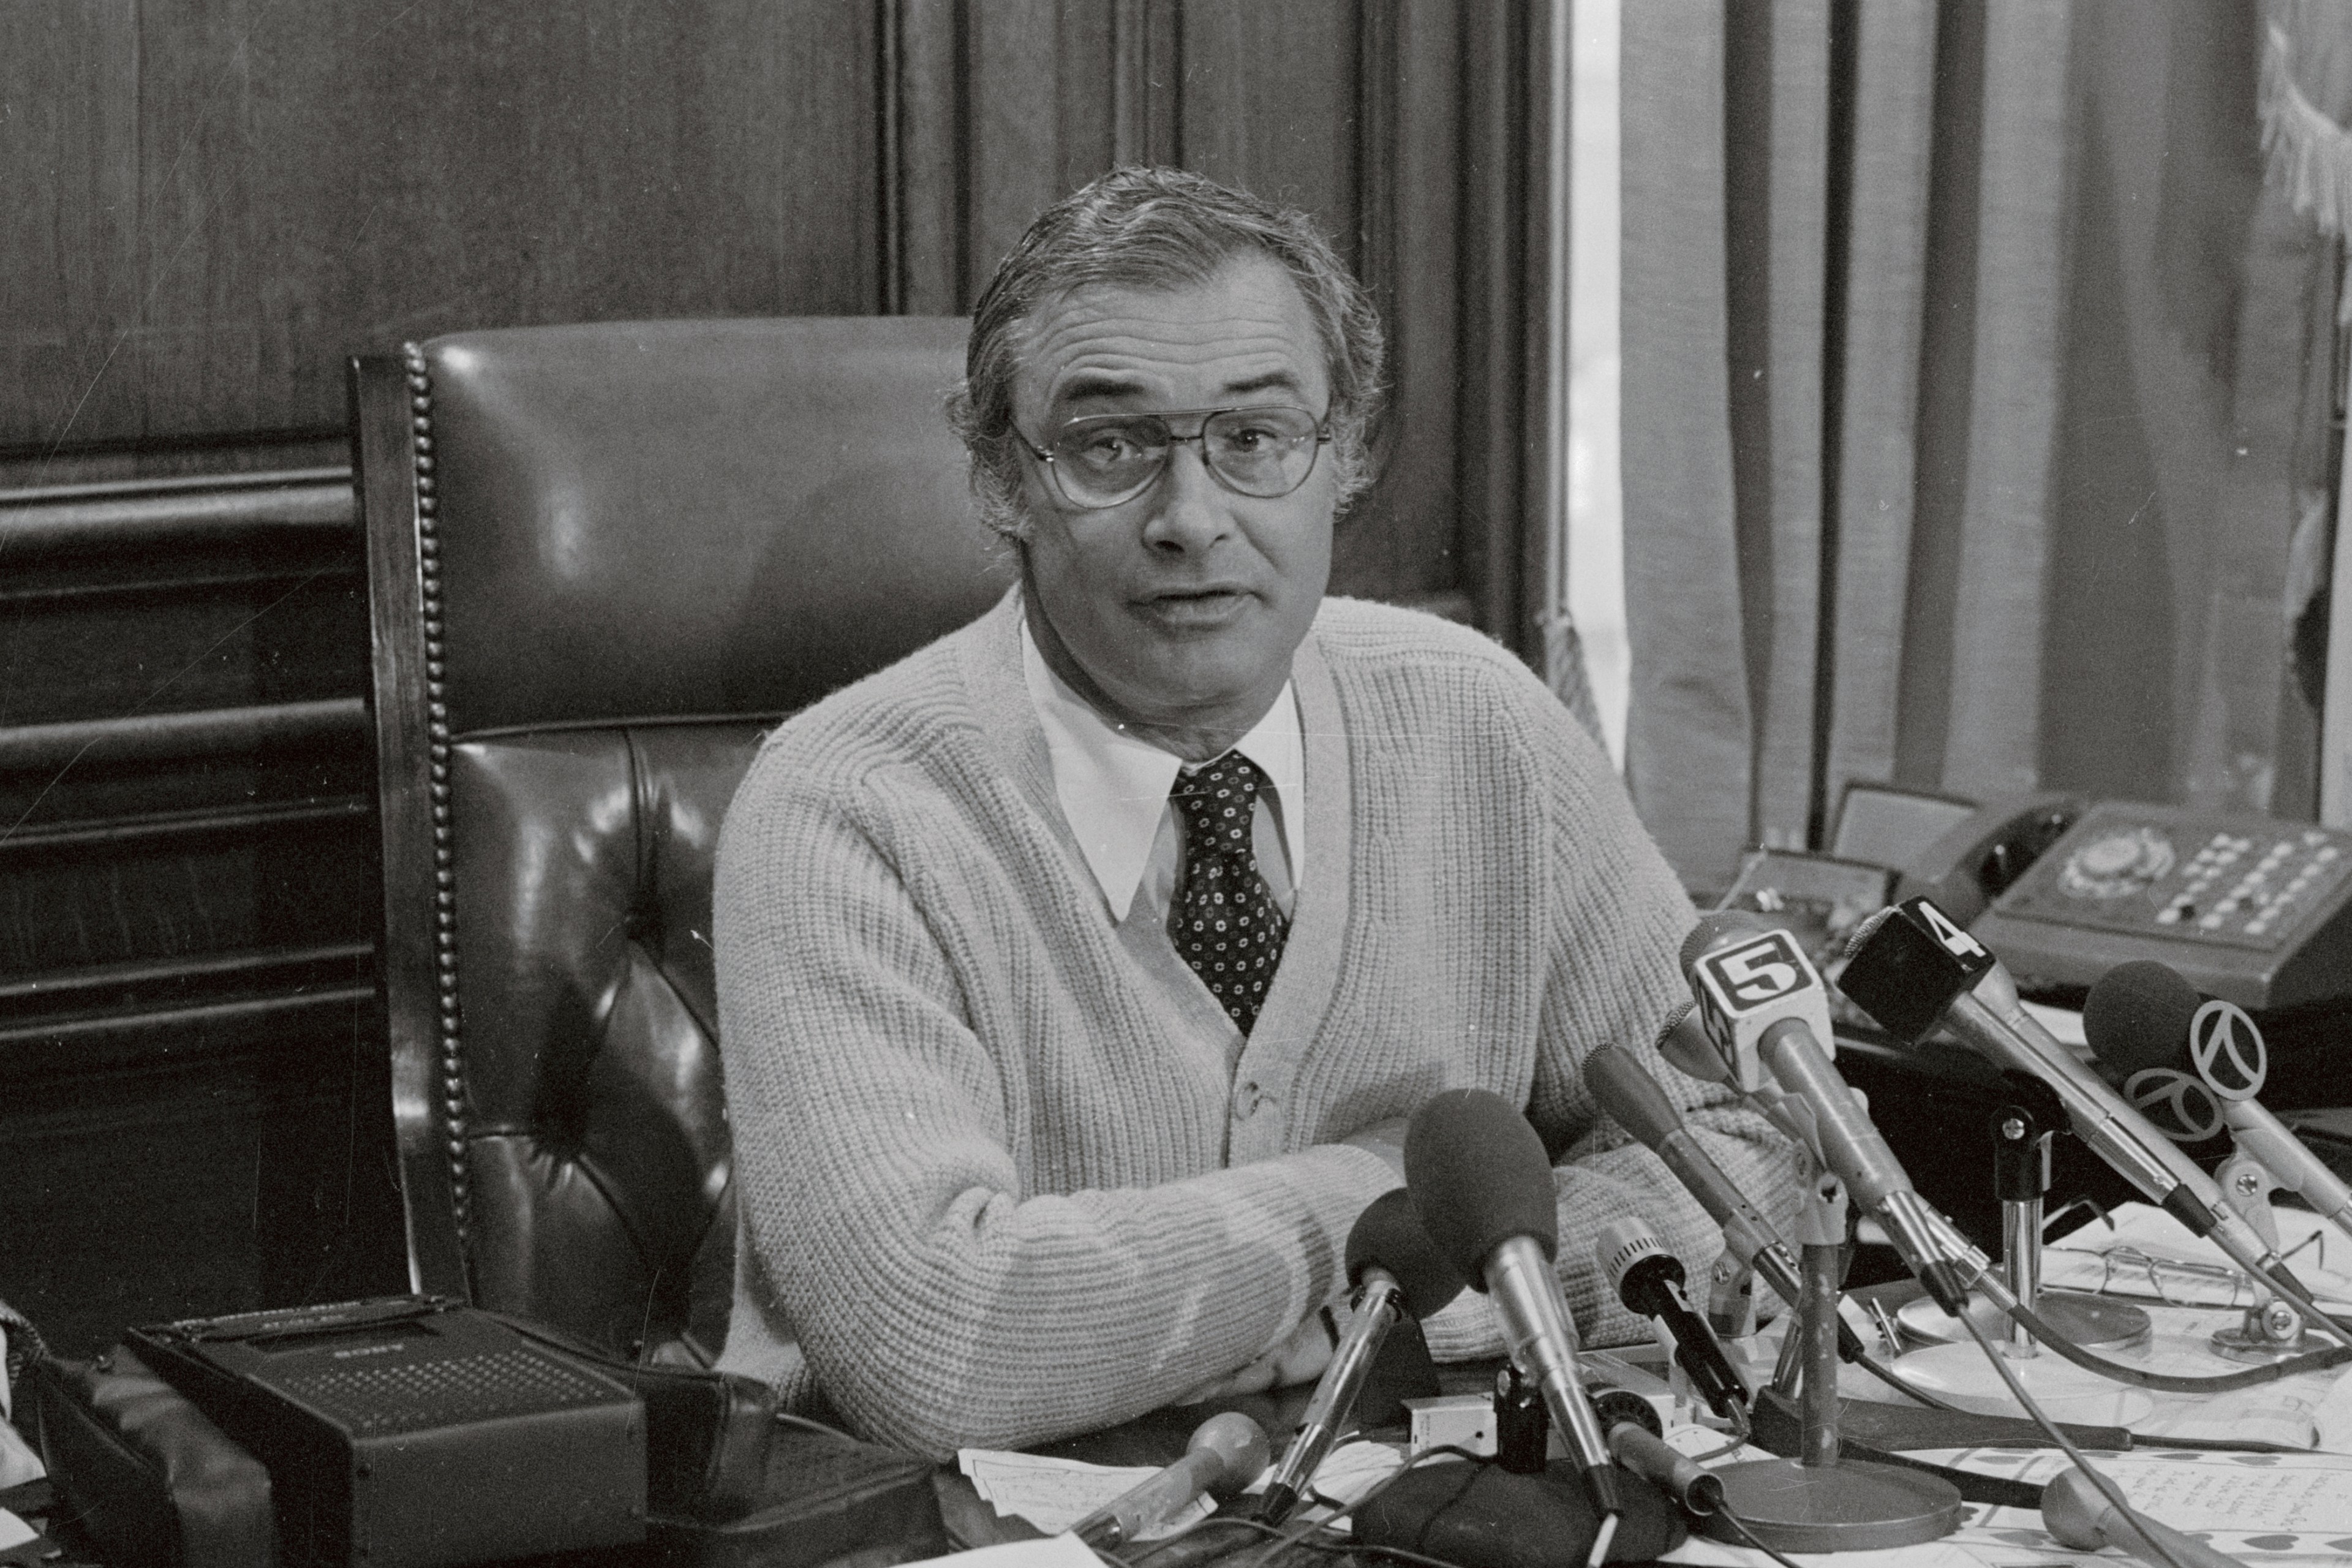 Mayor George Moscone speaks during a press conference.